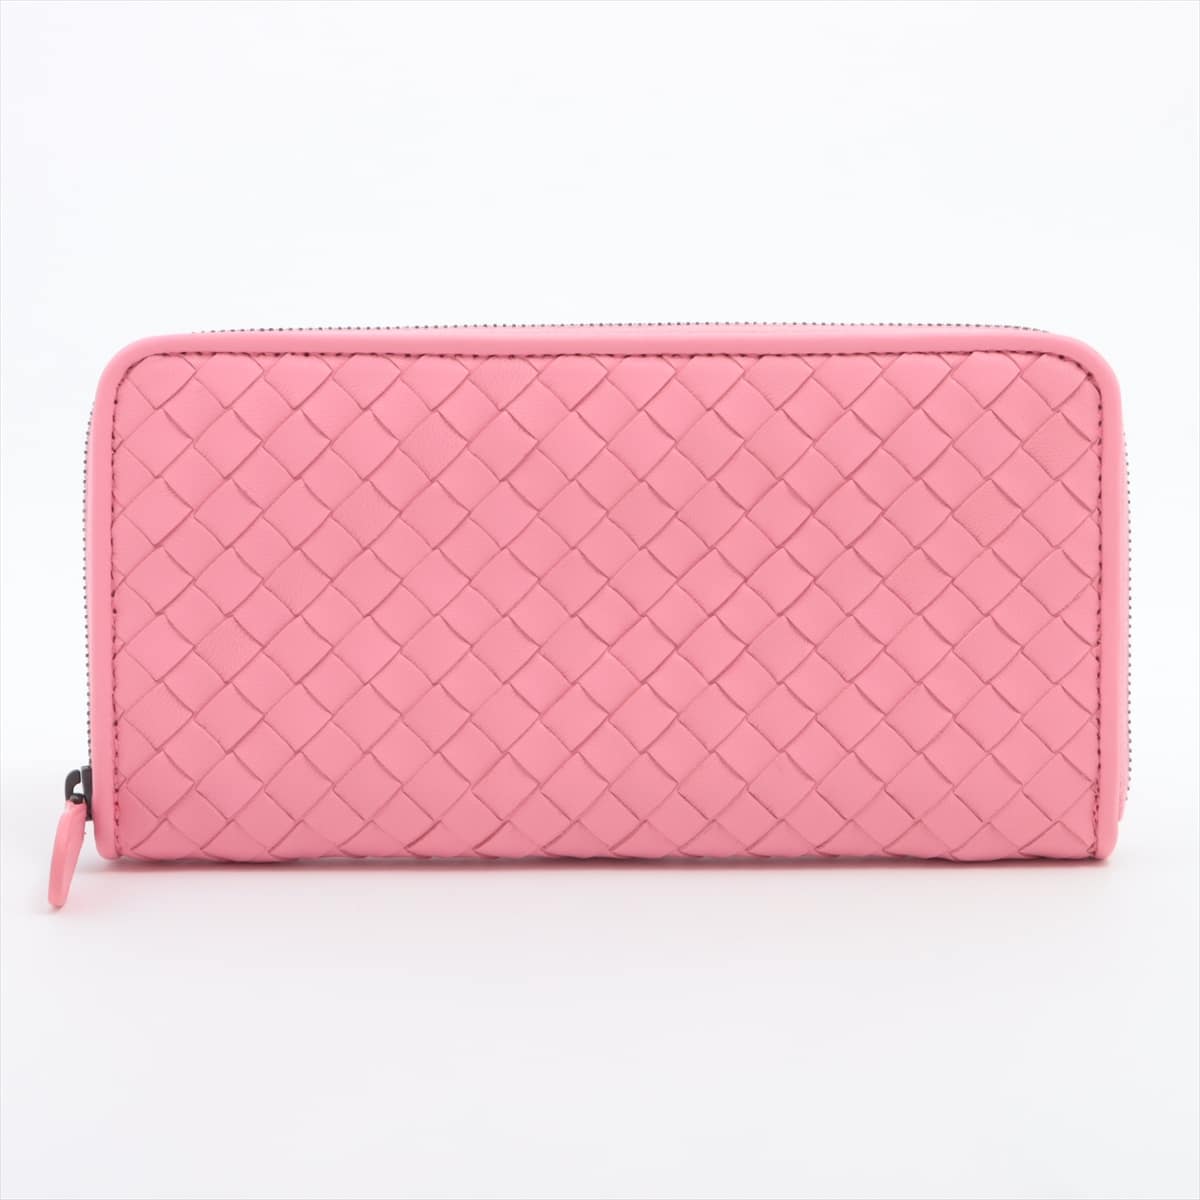 Bottega Veneta Intrecciato Leather Round-Zip-Wallet Pink Is there a coin compartment stain